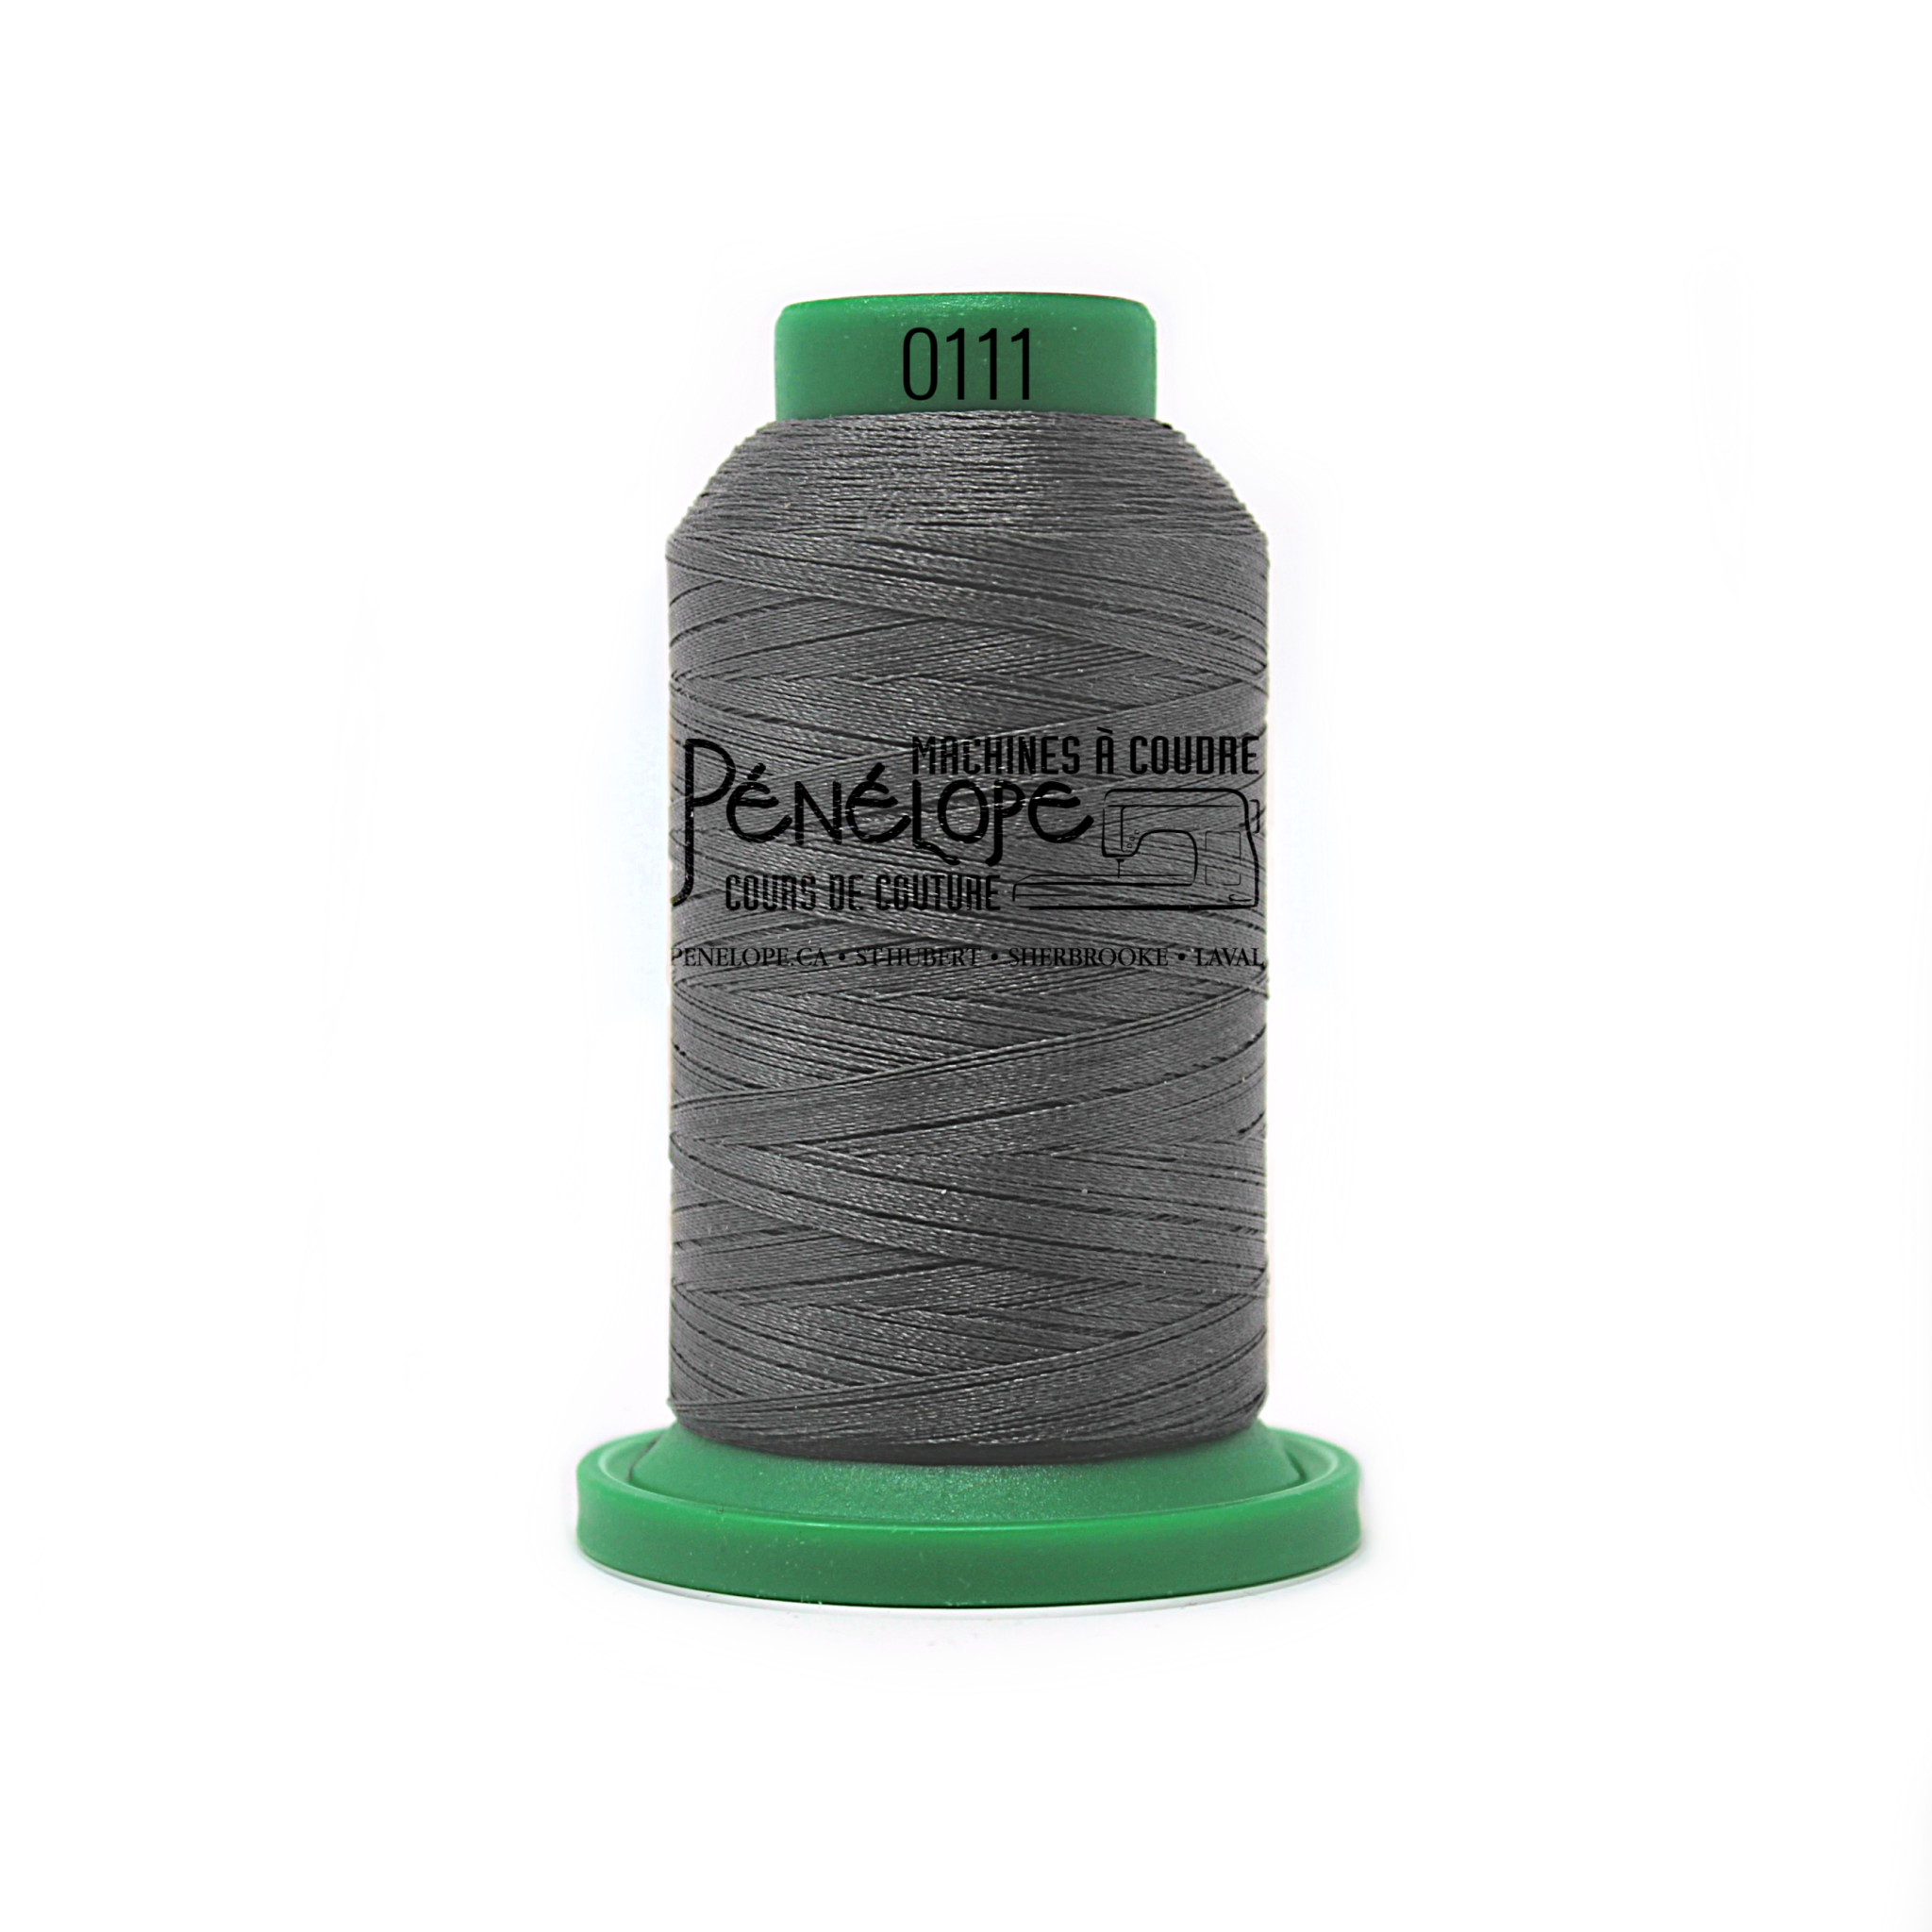 Isacord Isacord sewing and embroidery thread 0111